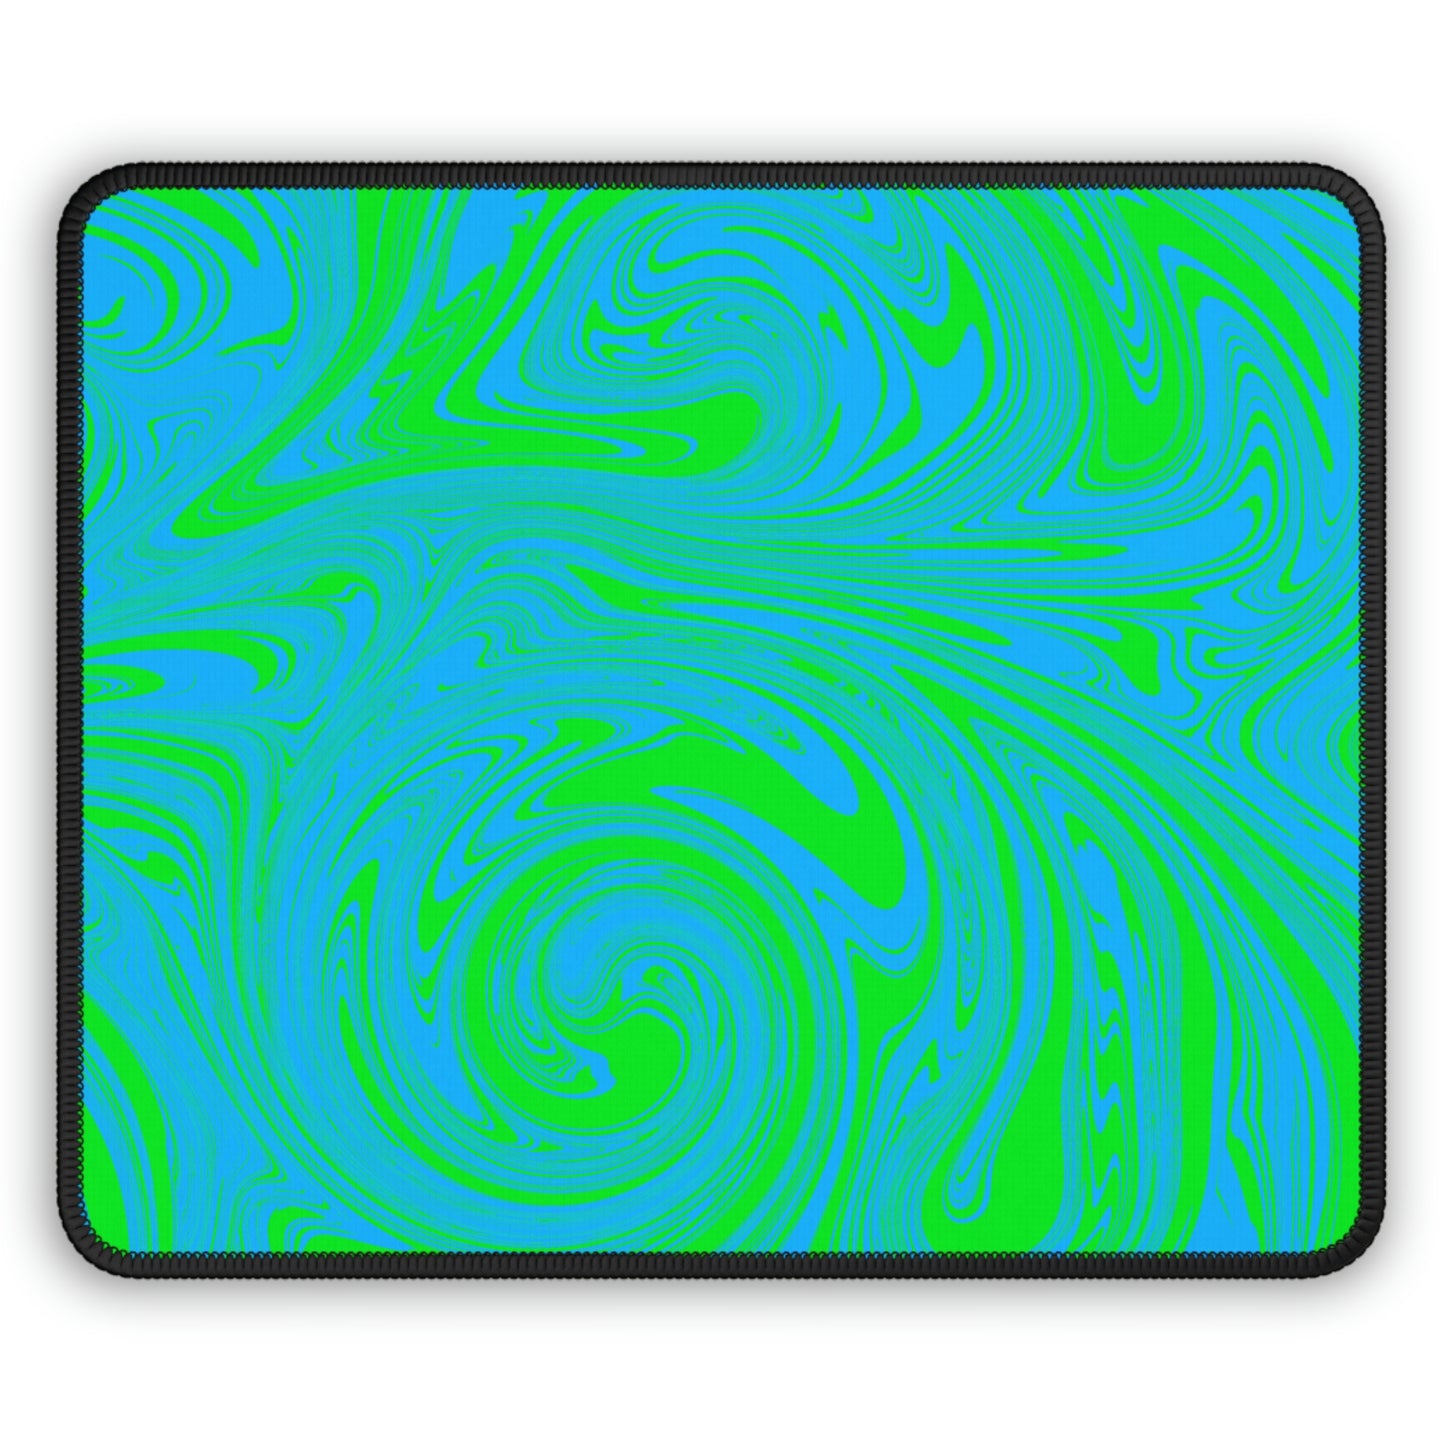 A gaming mouse pad with blue and green swirls.